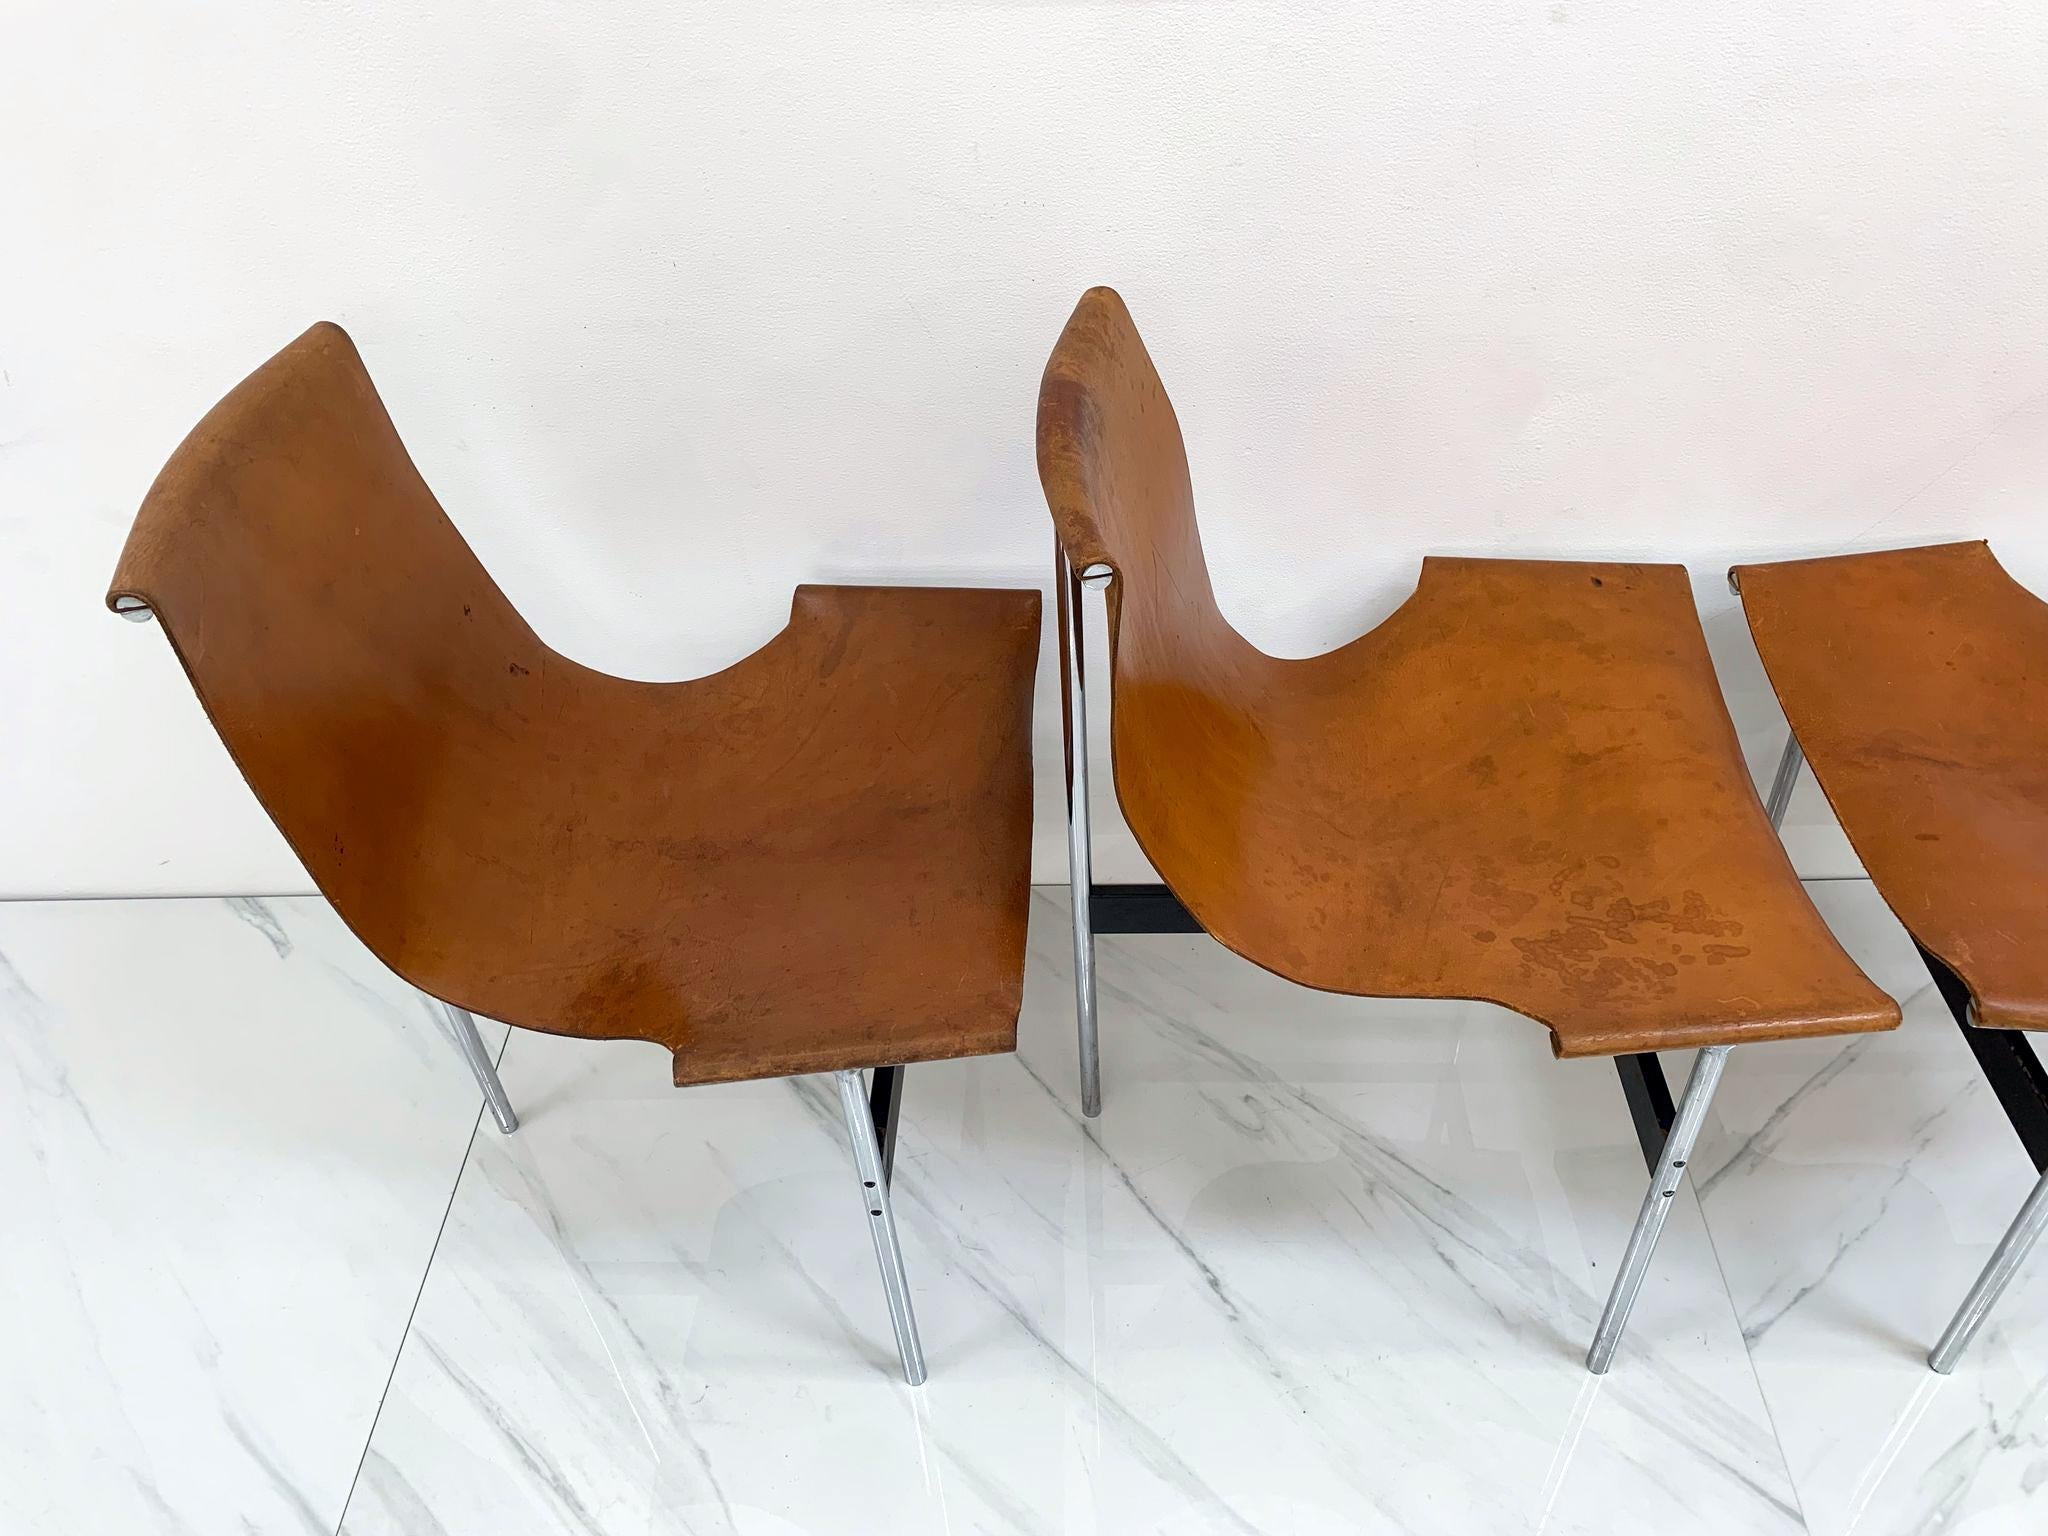 Steel Set of Four Patinated Cognac Leather T Chairs, Katavolos & Littell & Kelley